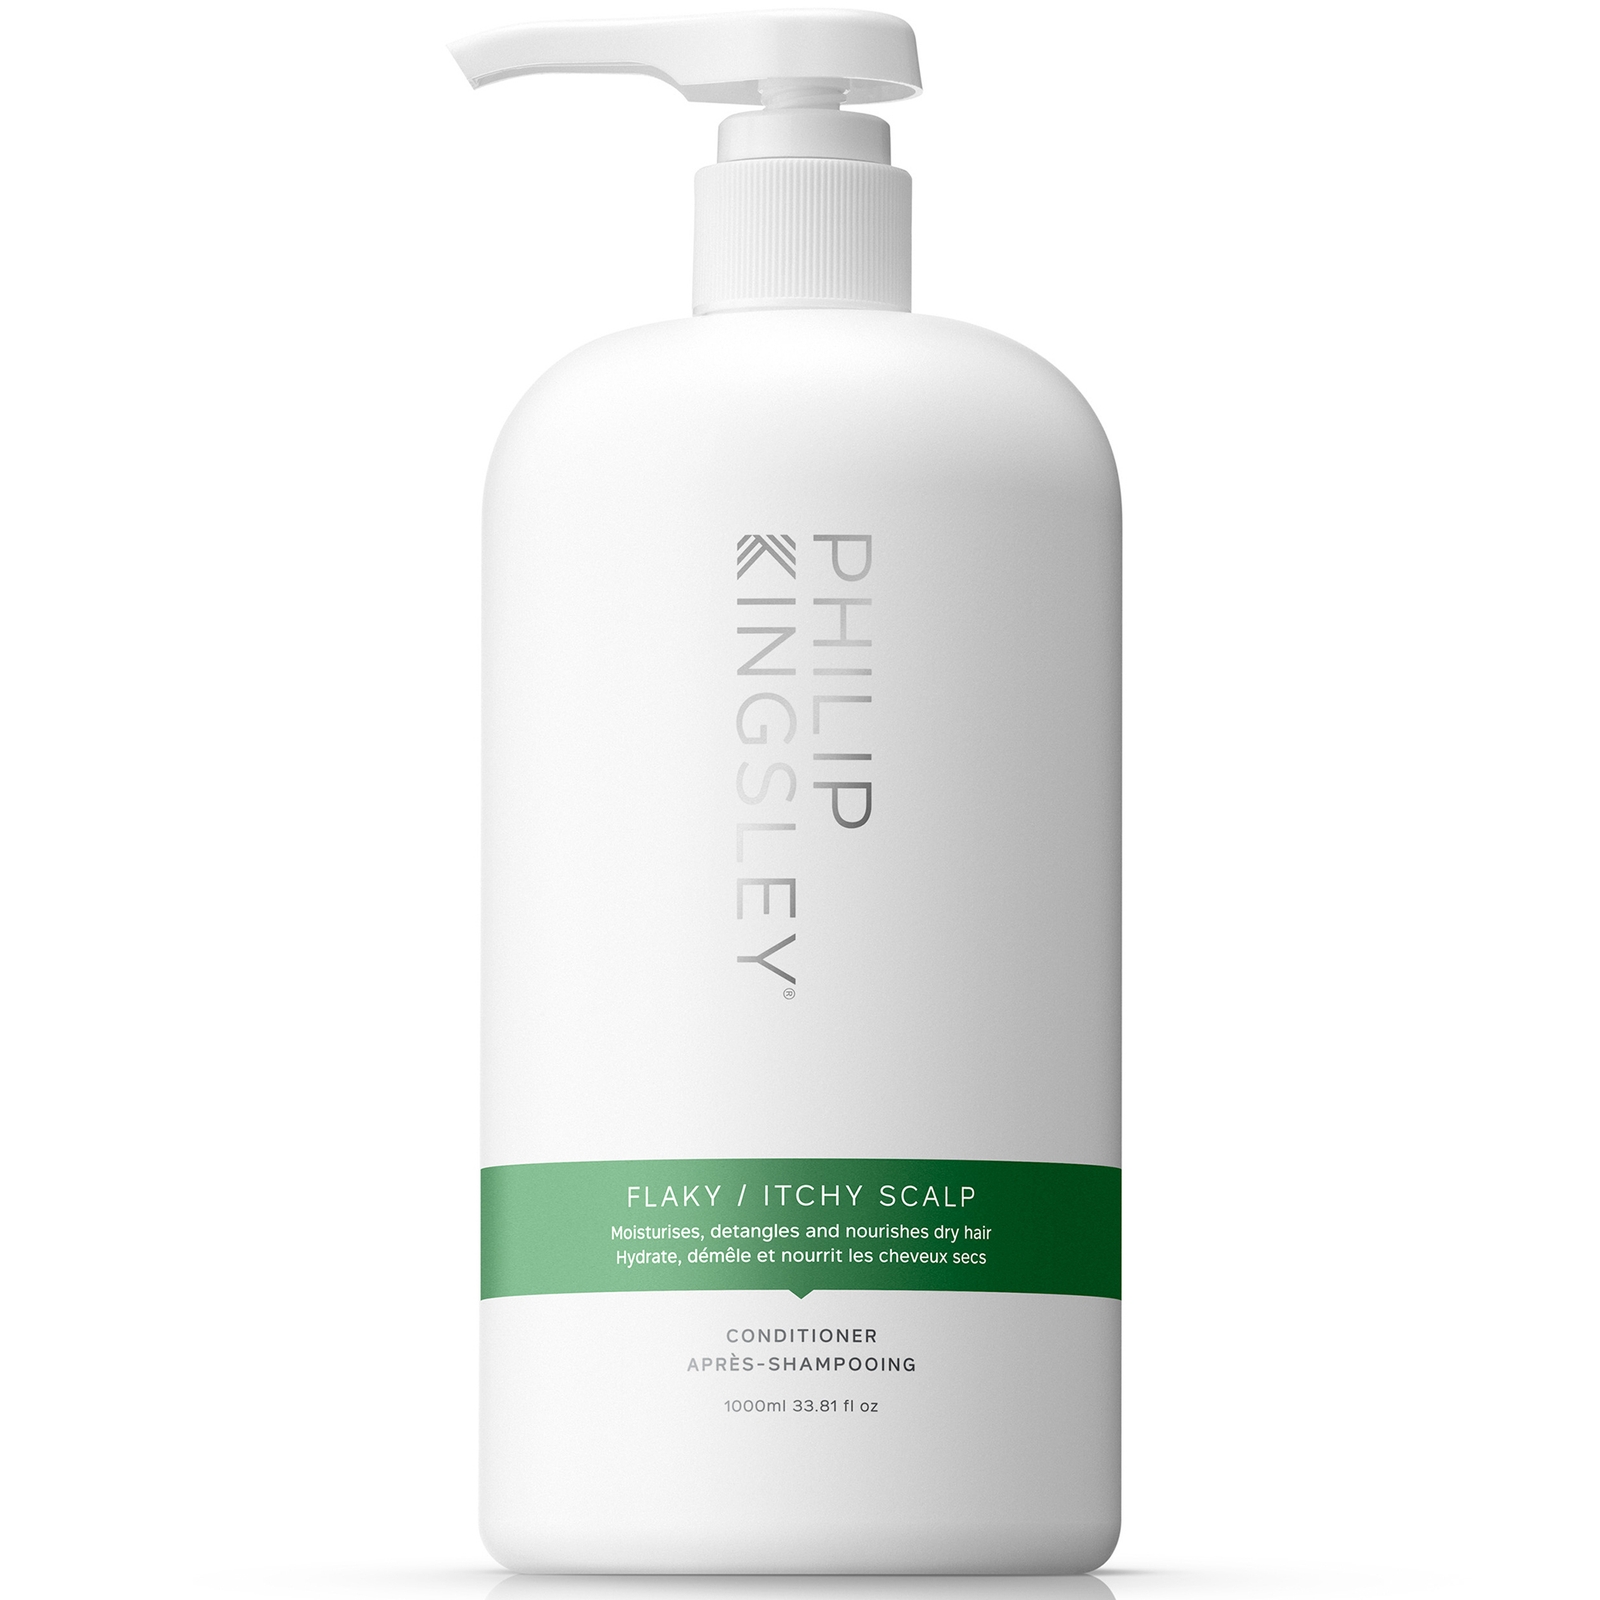 Photos - Hair Product Philip Kingsley Flaky/Itchy Scalp Conditioner 1000ml  PHI96 (Worth £135.00)